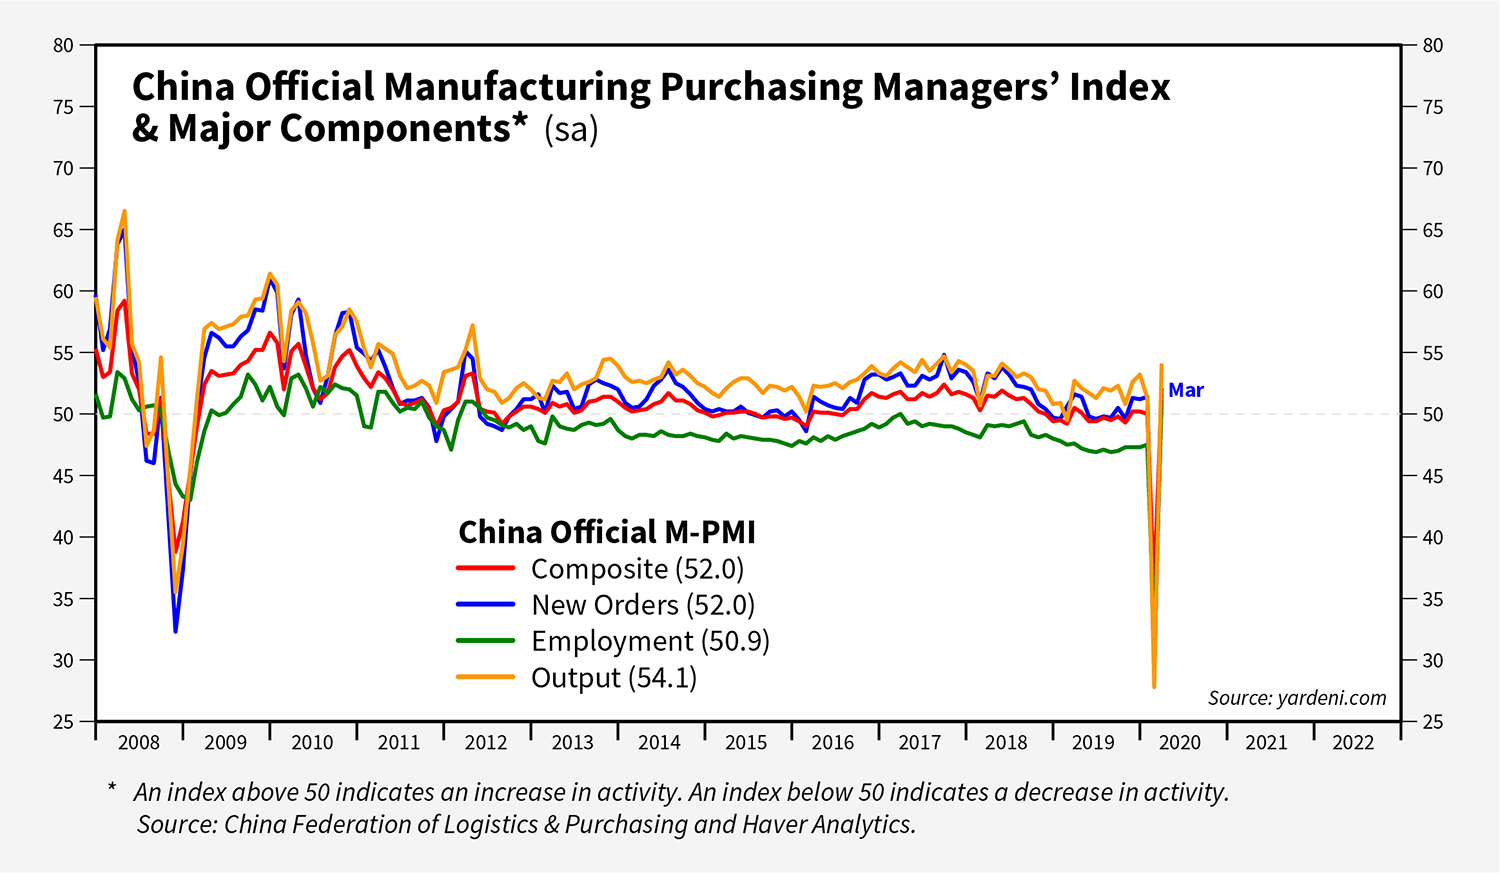 China Official Manufacturing Purchasing Managers' Index & Major Components